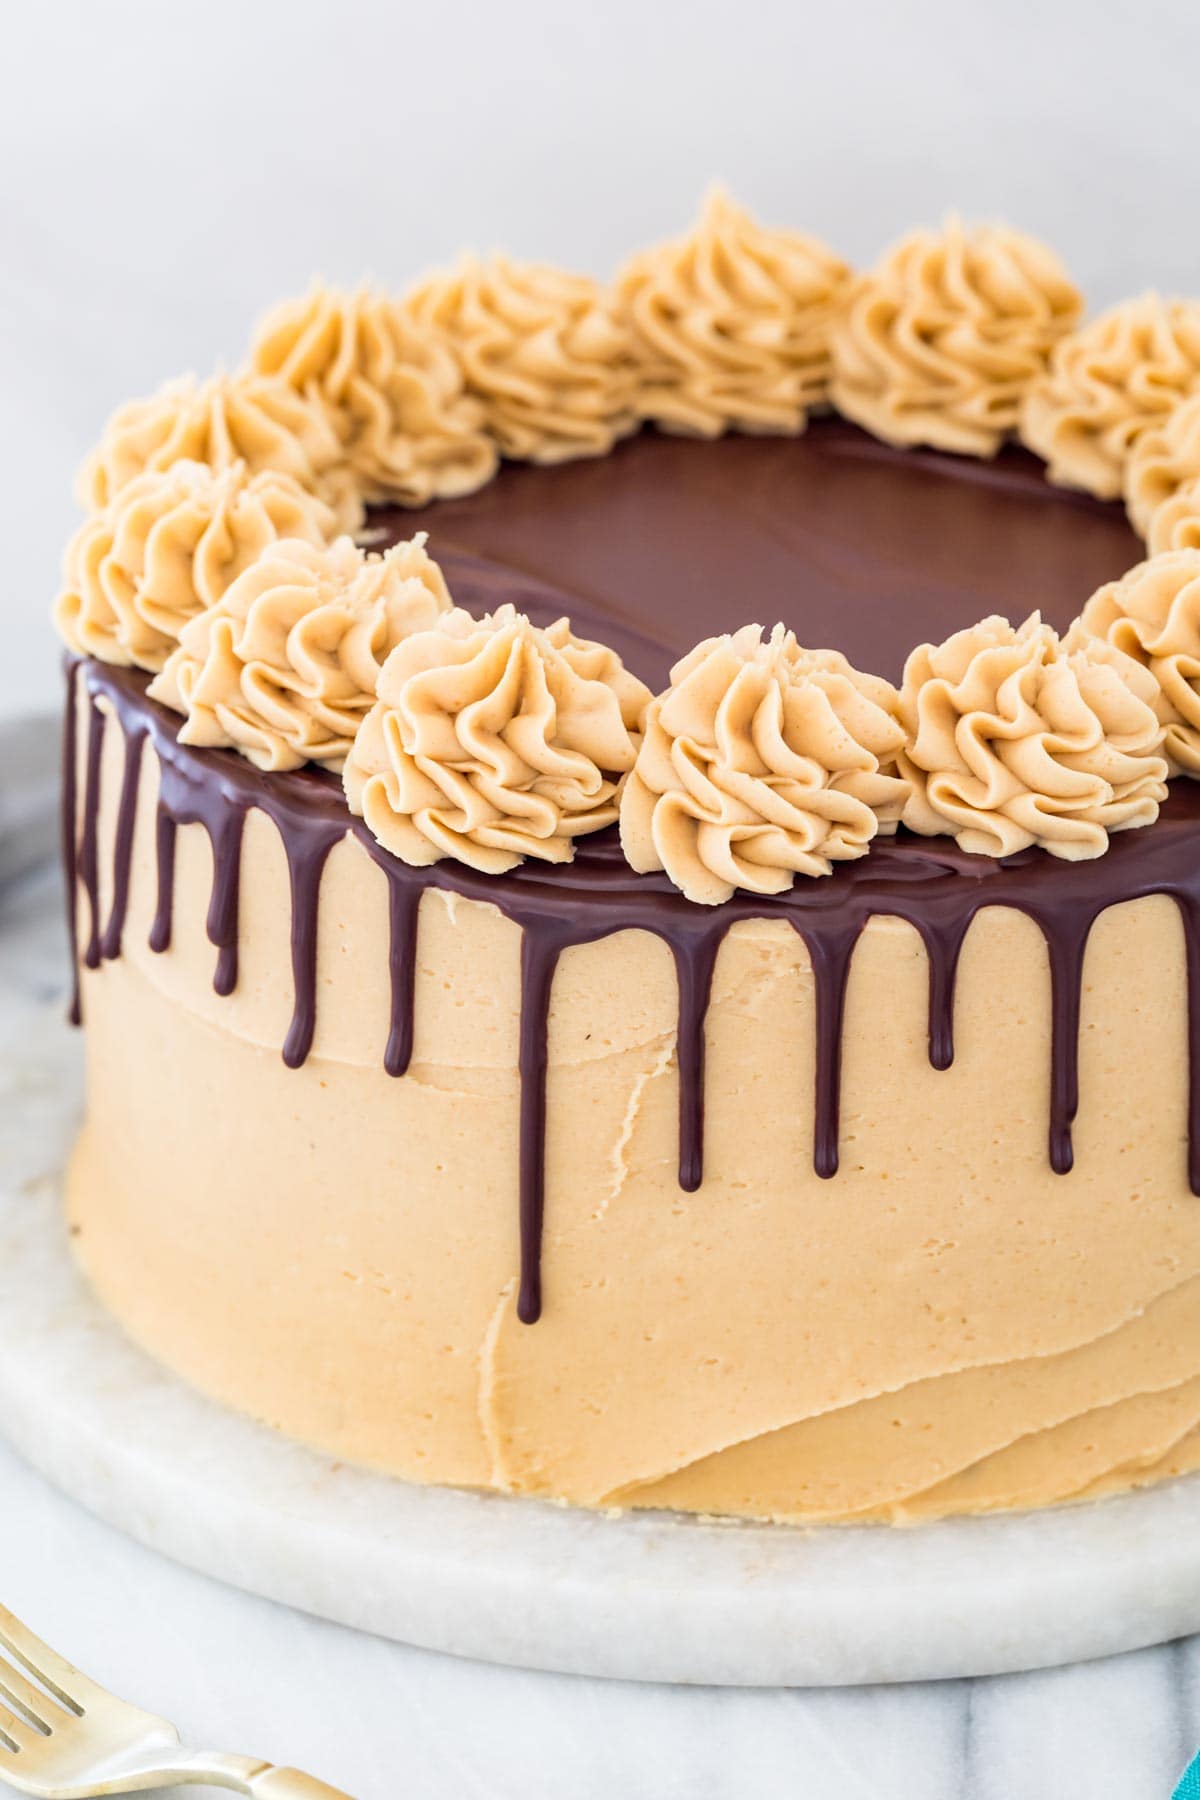 chocolate ganache drip on a peanut butter frosted cake